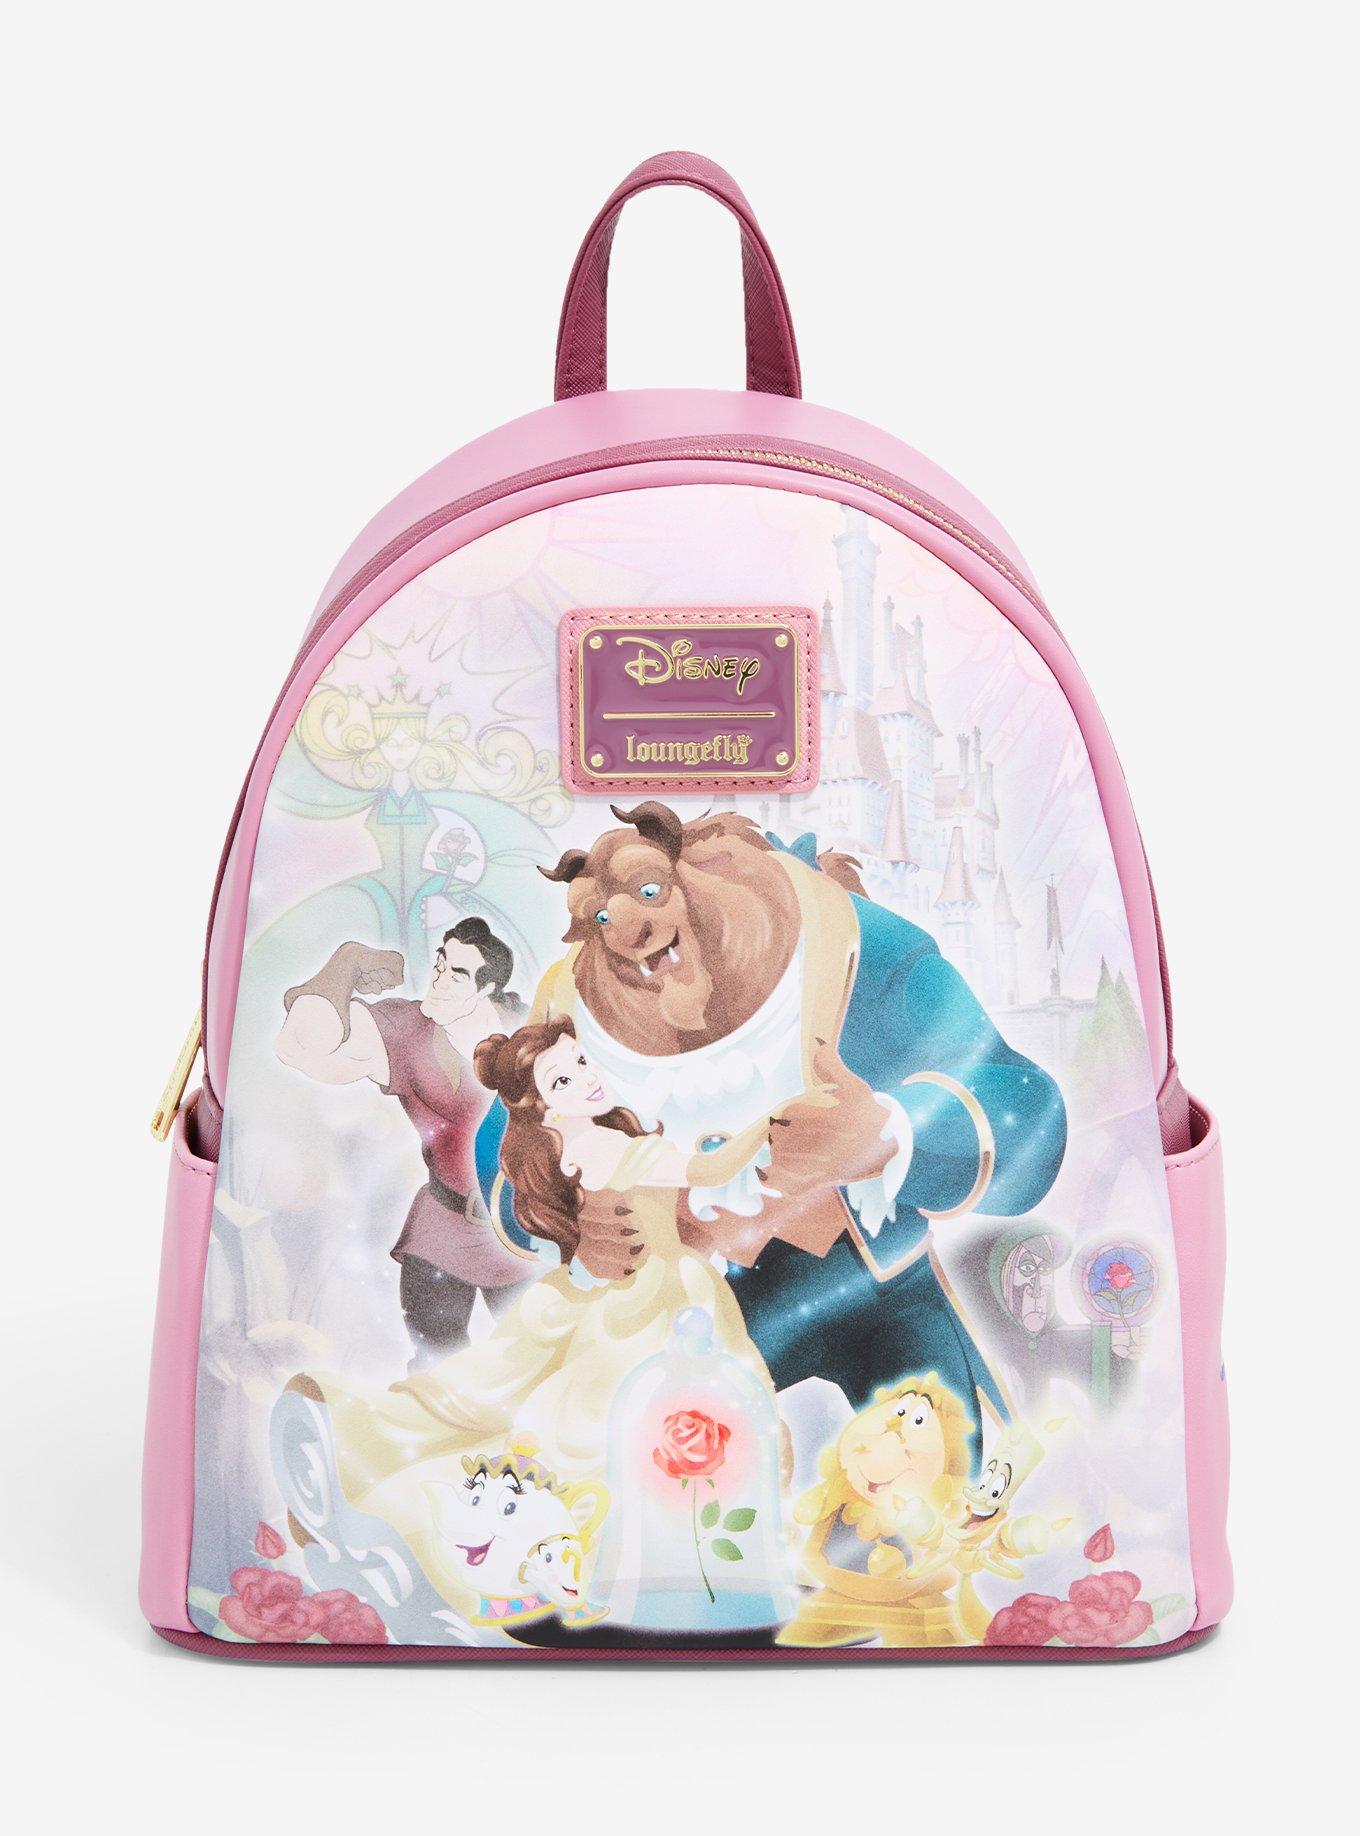  Loungefly GT Exclusive Disney Beauty and the Beast Comic AOP  Mini Backpack